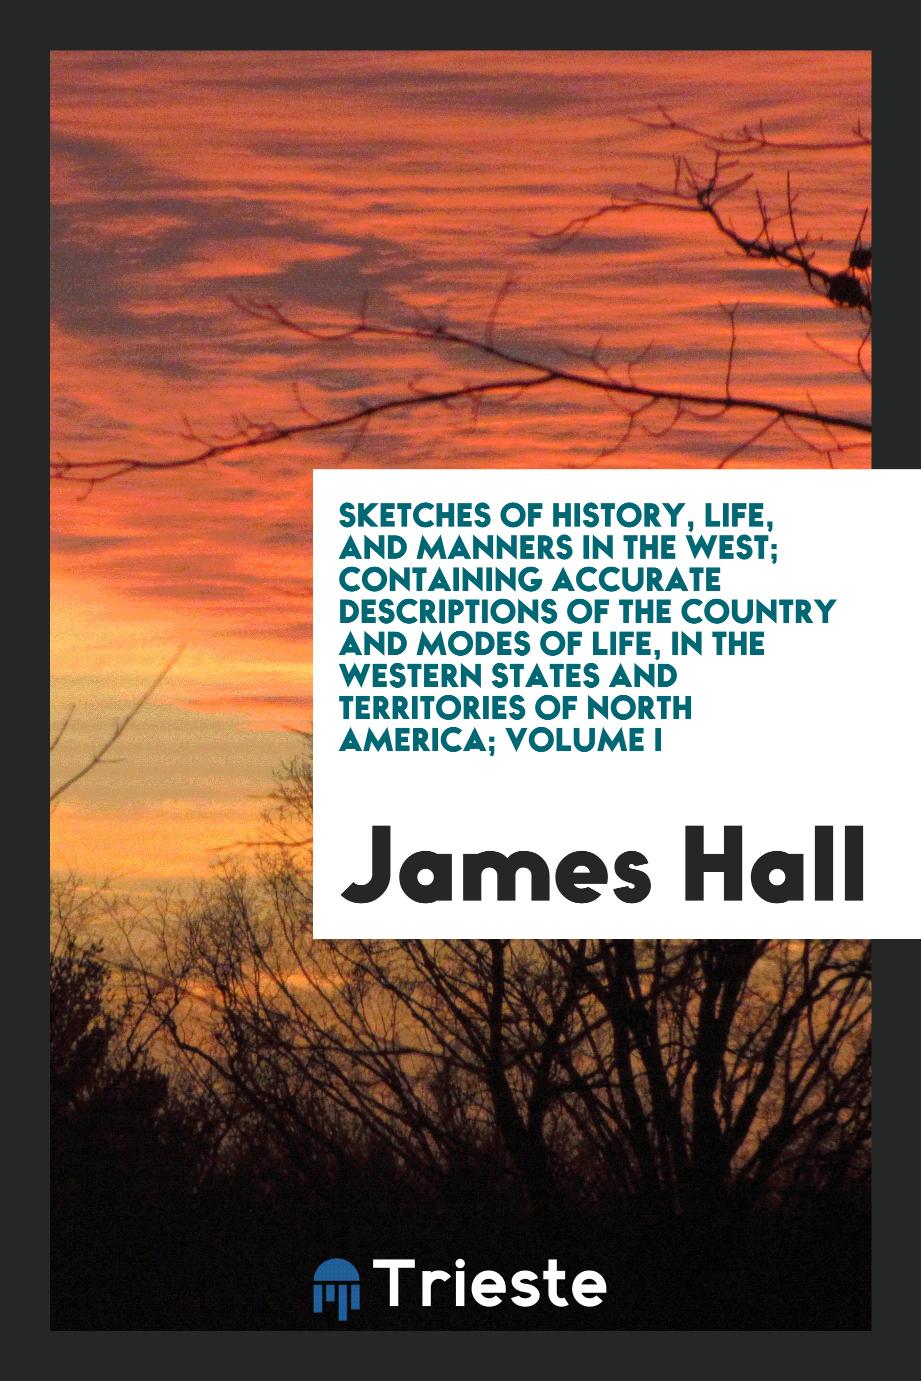 Sketches of history, life, and manners in the West; containing accurate descriptions of the country and modes of life, in the western states and territories of North America; Volume I